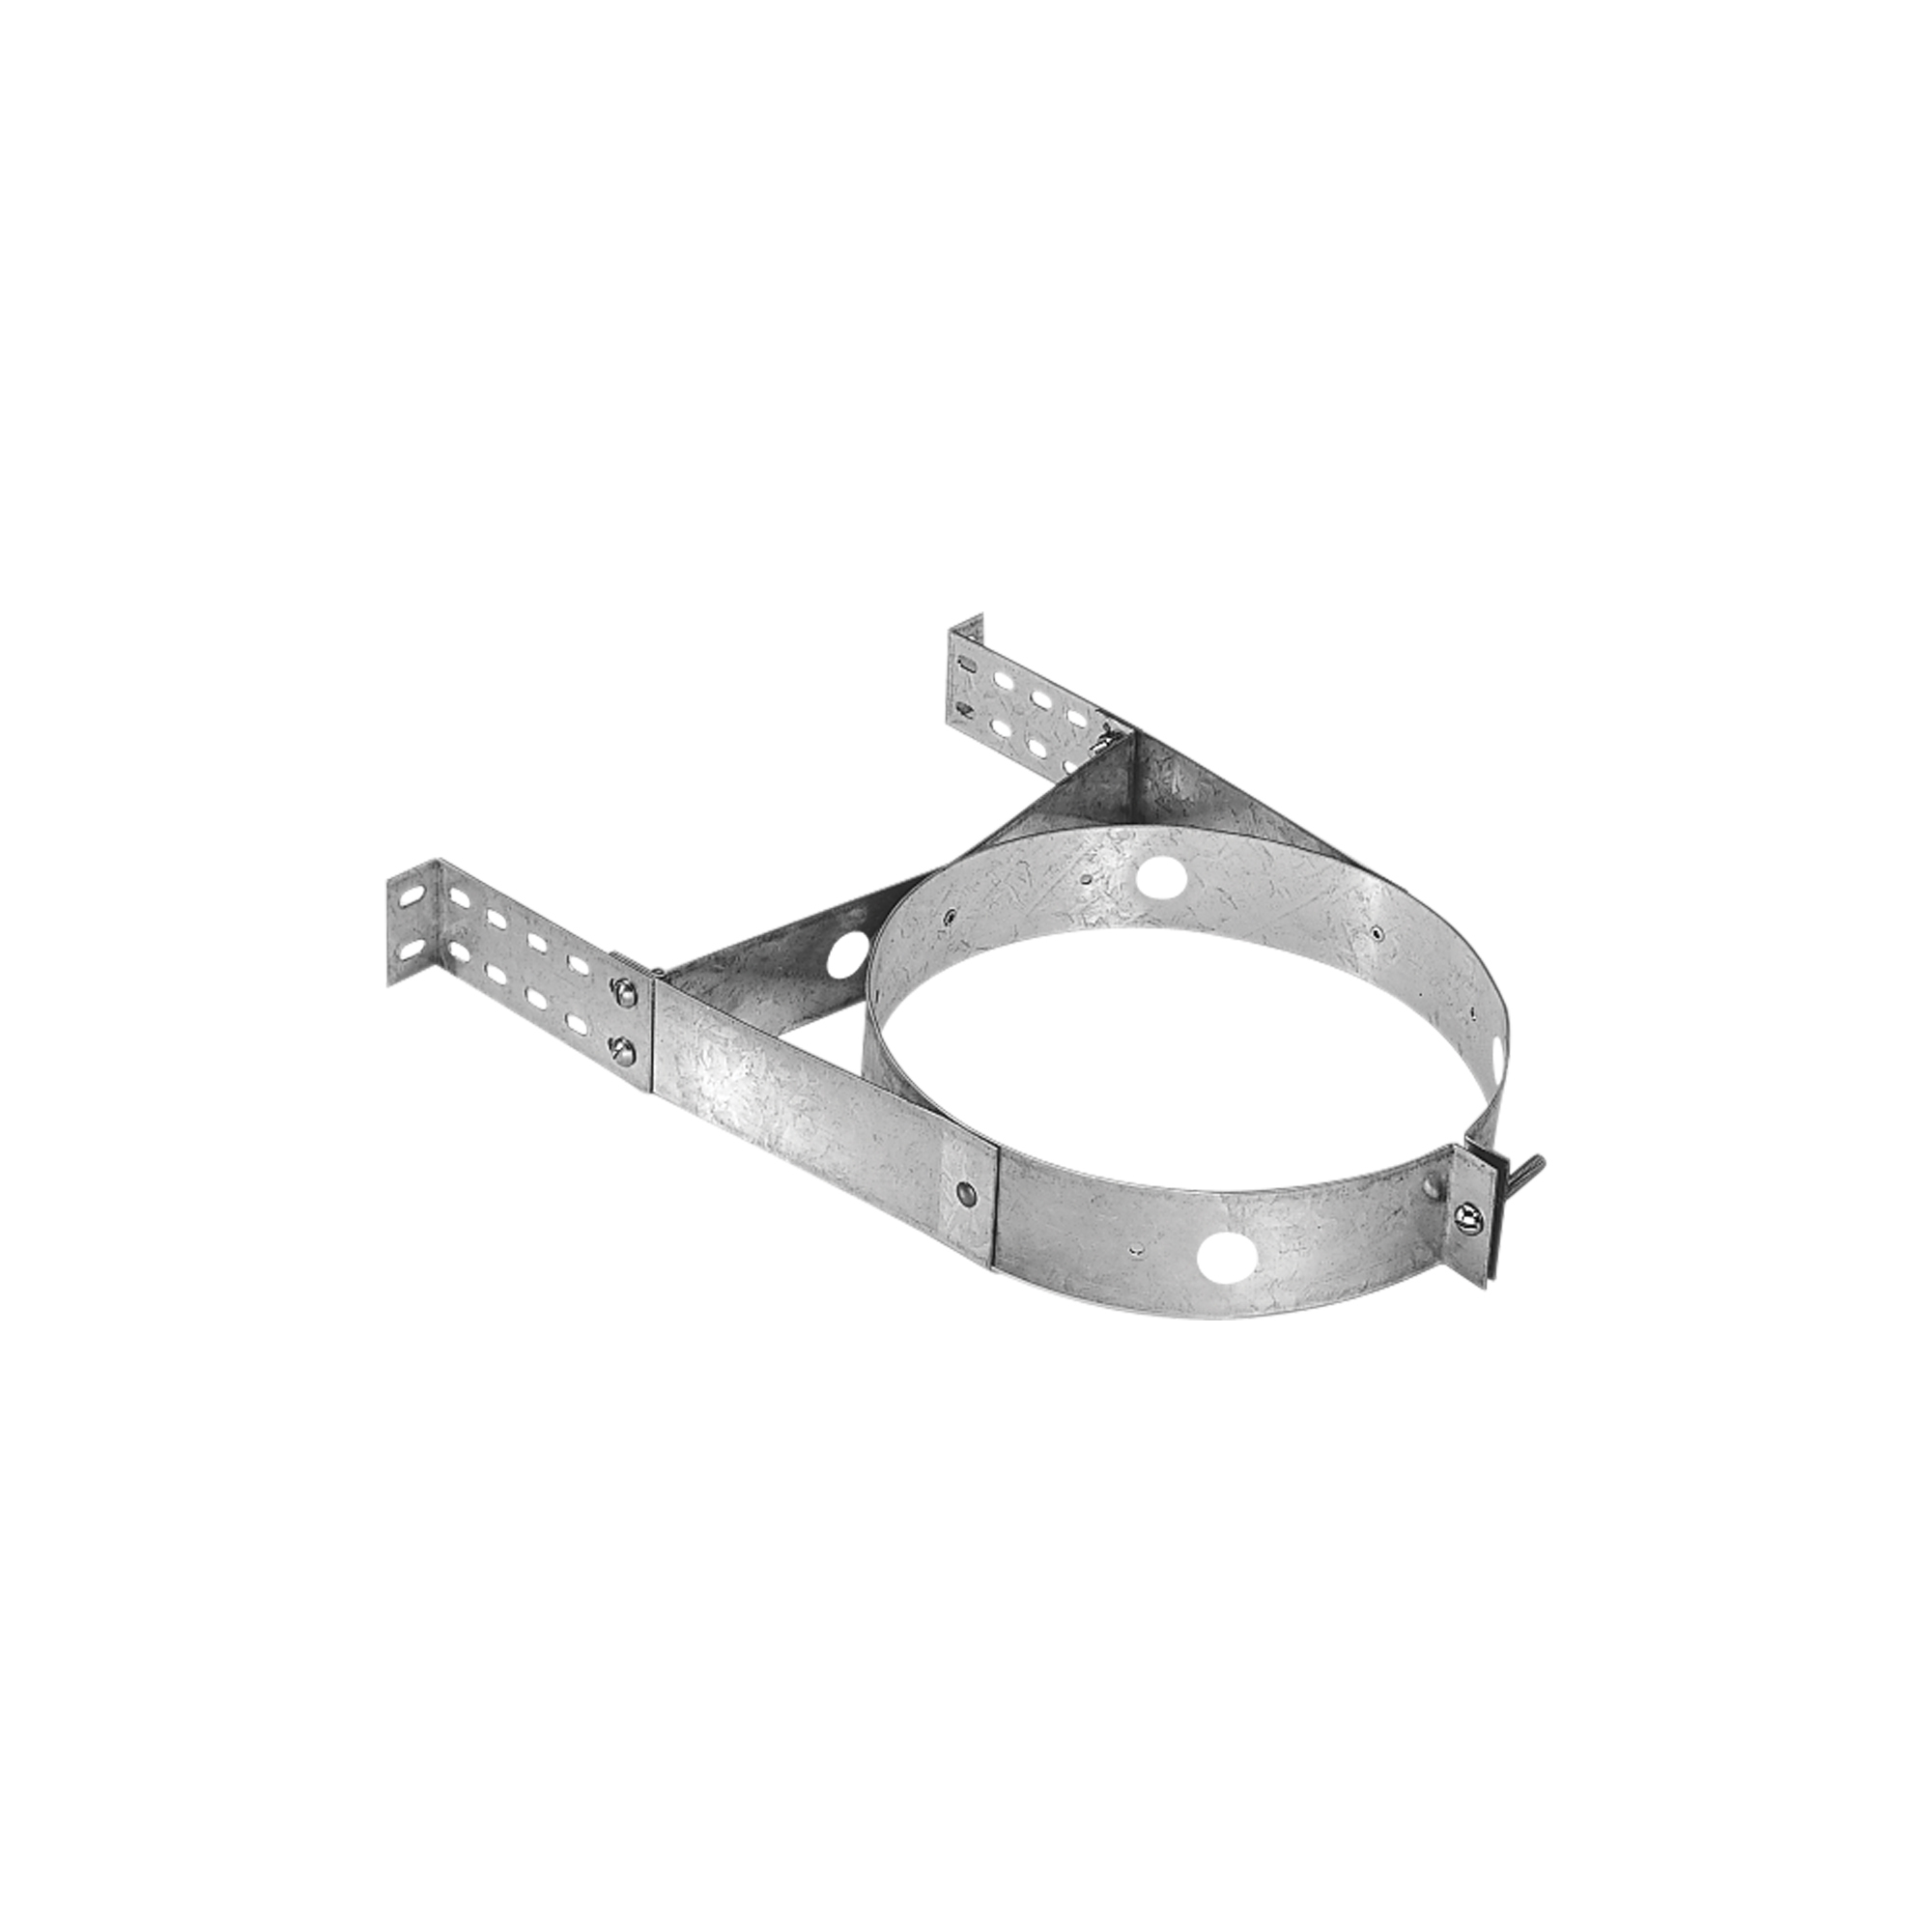 DuraVent, 8Inch Diameter Wall Strap, Included (qty.) 1 Material Galvanized Steel, Model 8DP-AWS